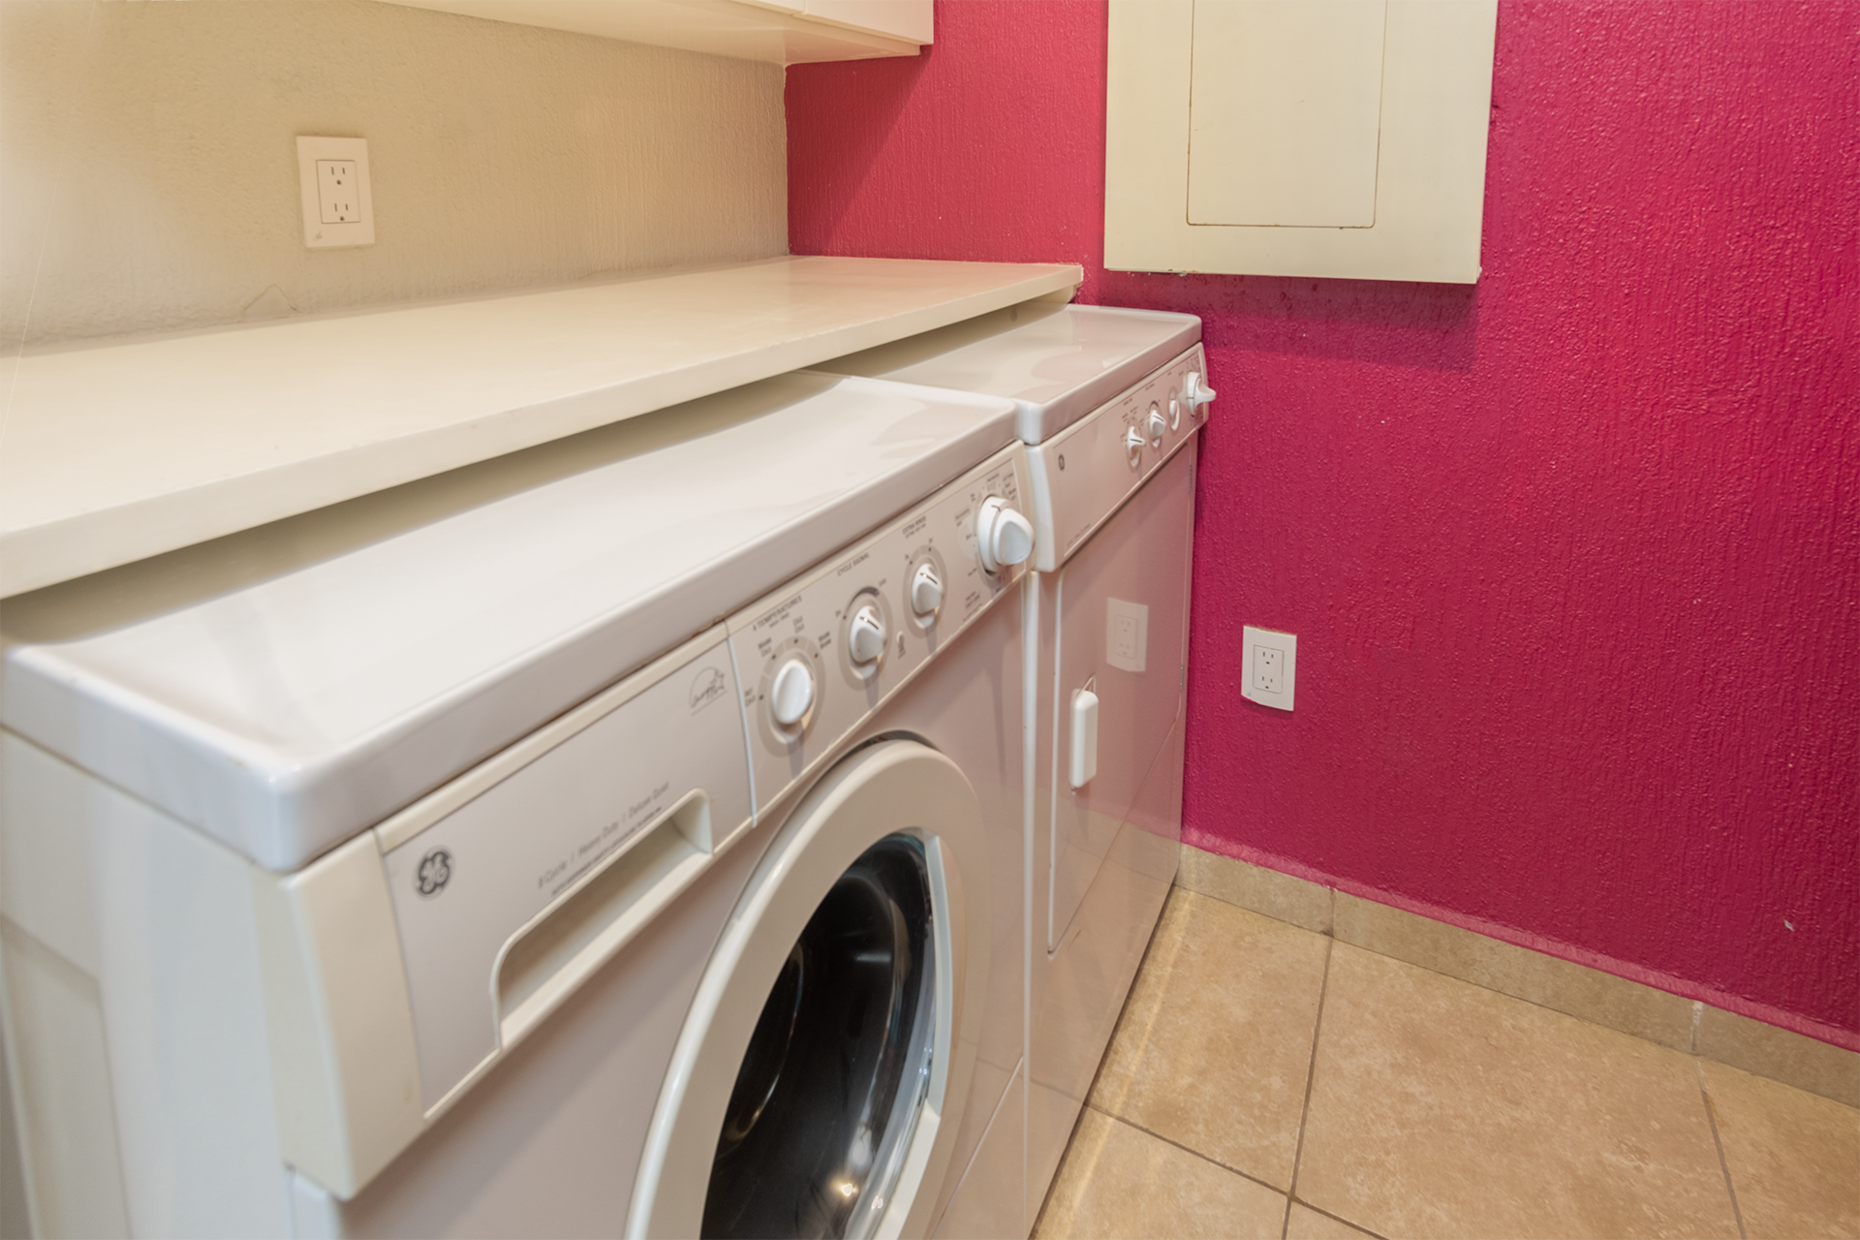 The utility room has a full sized washer and dryer.